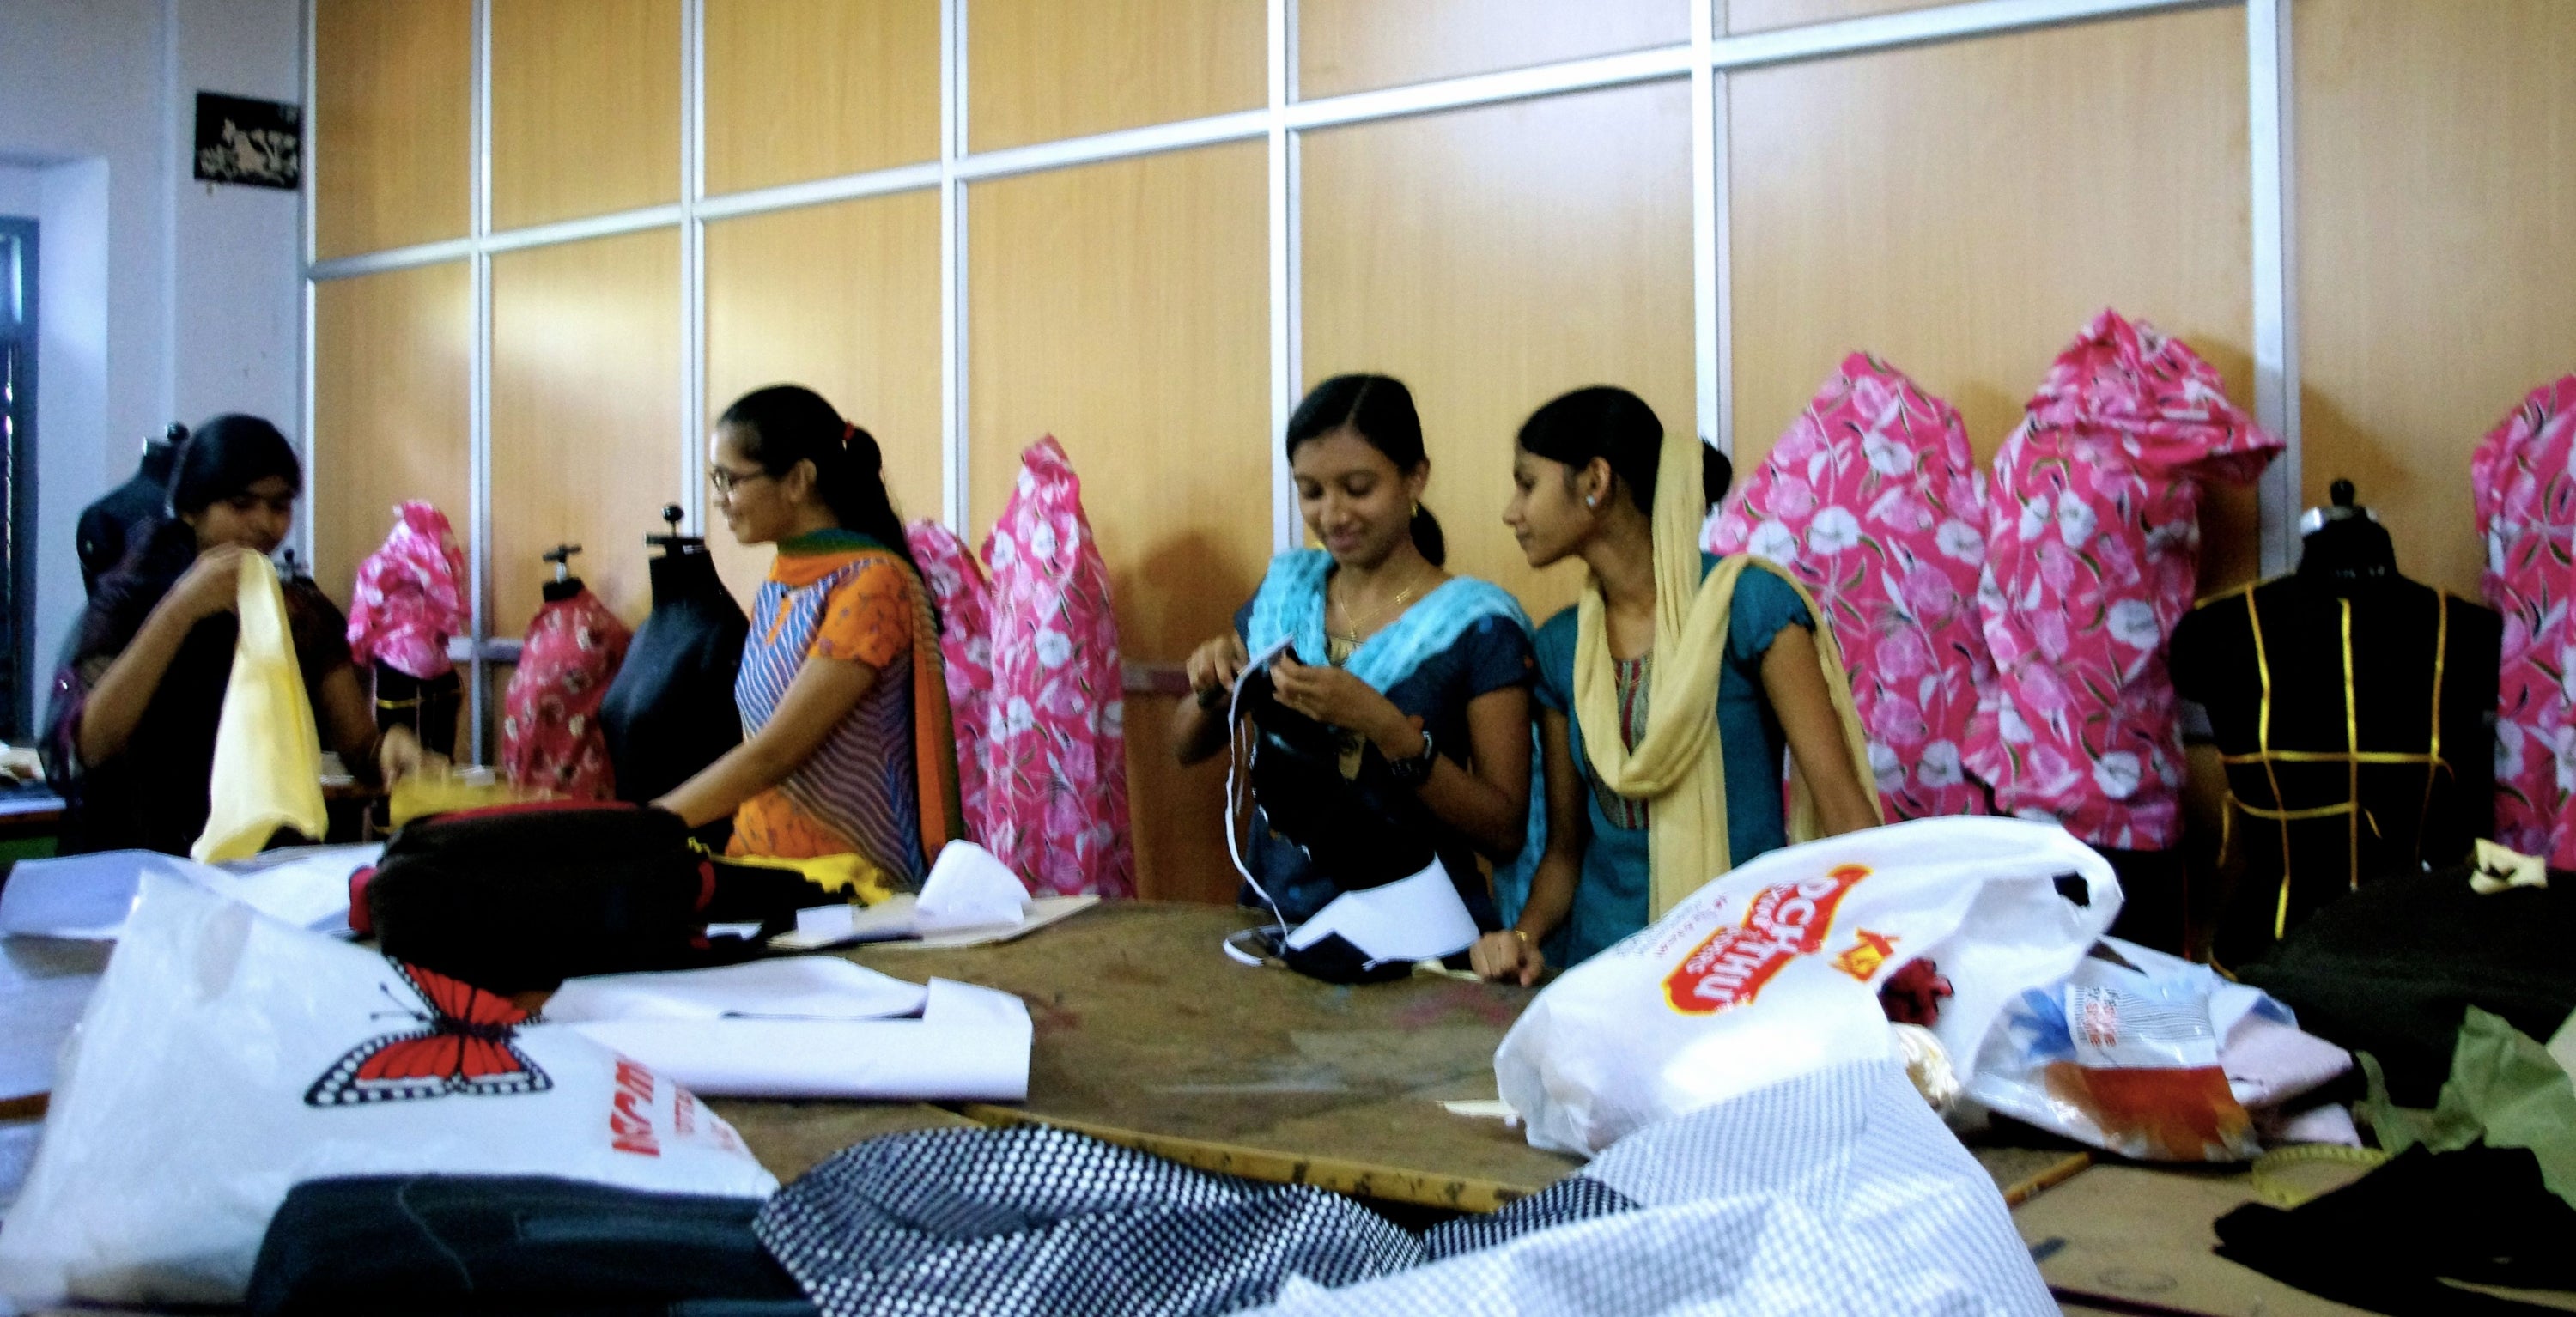 Indian women working with fabrics